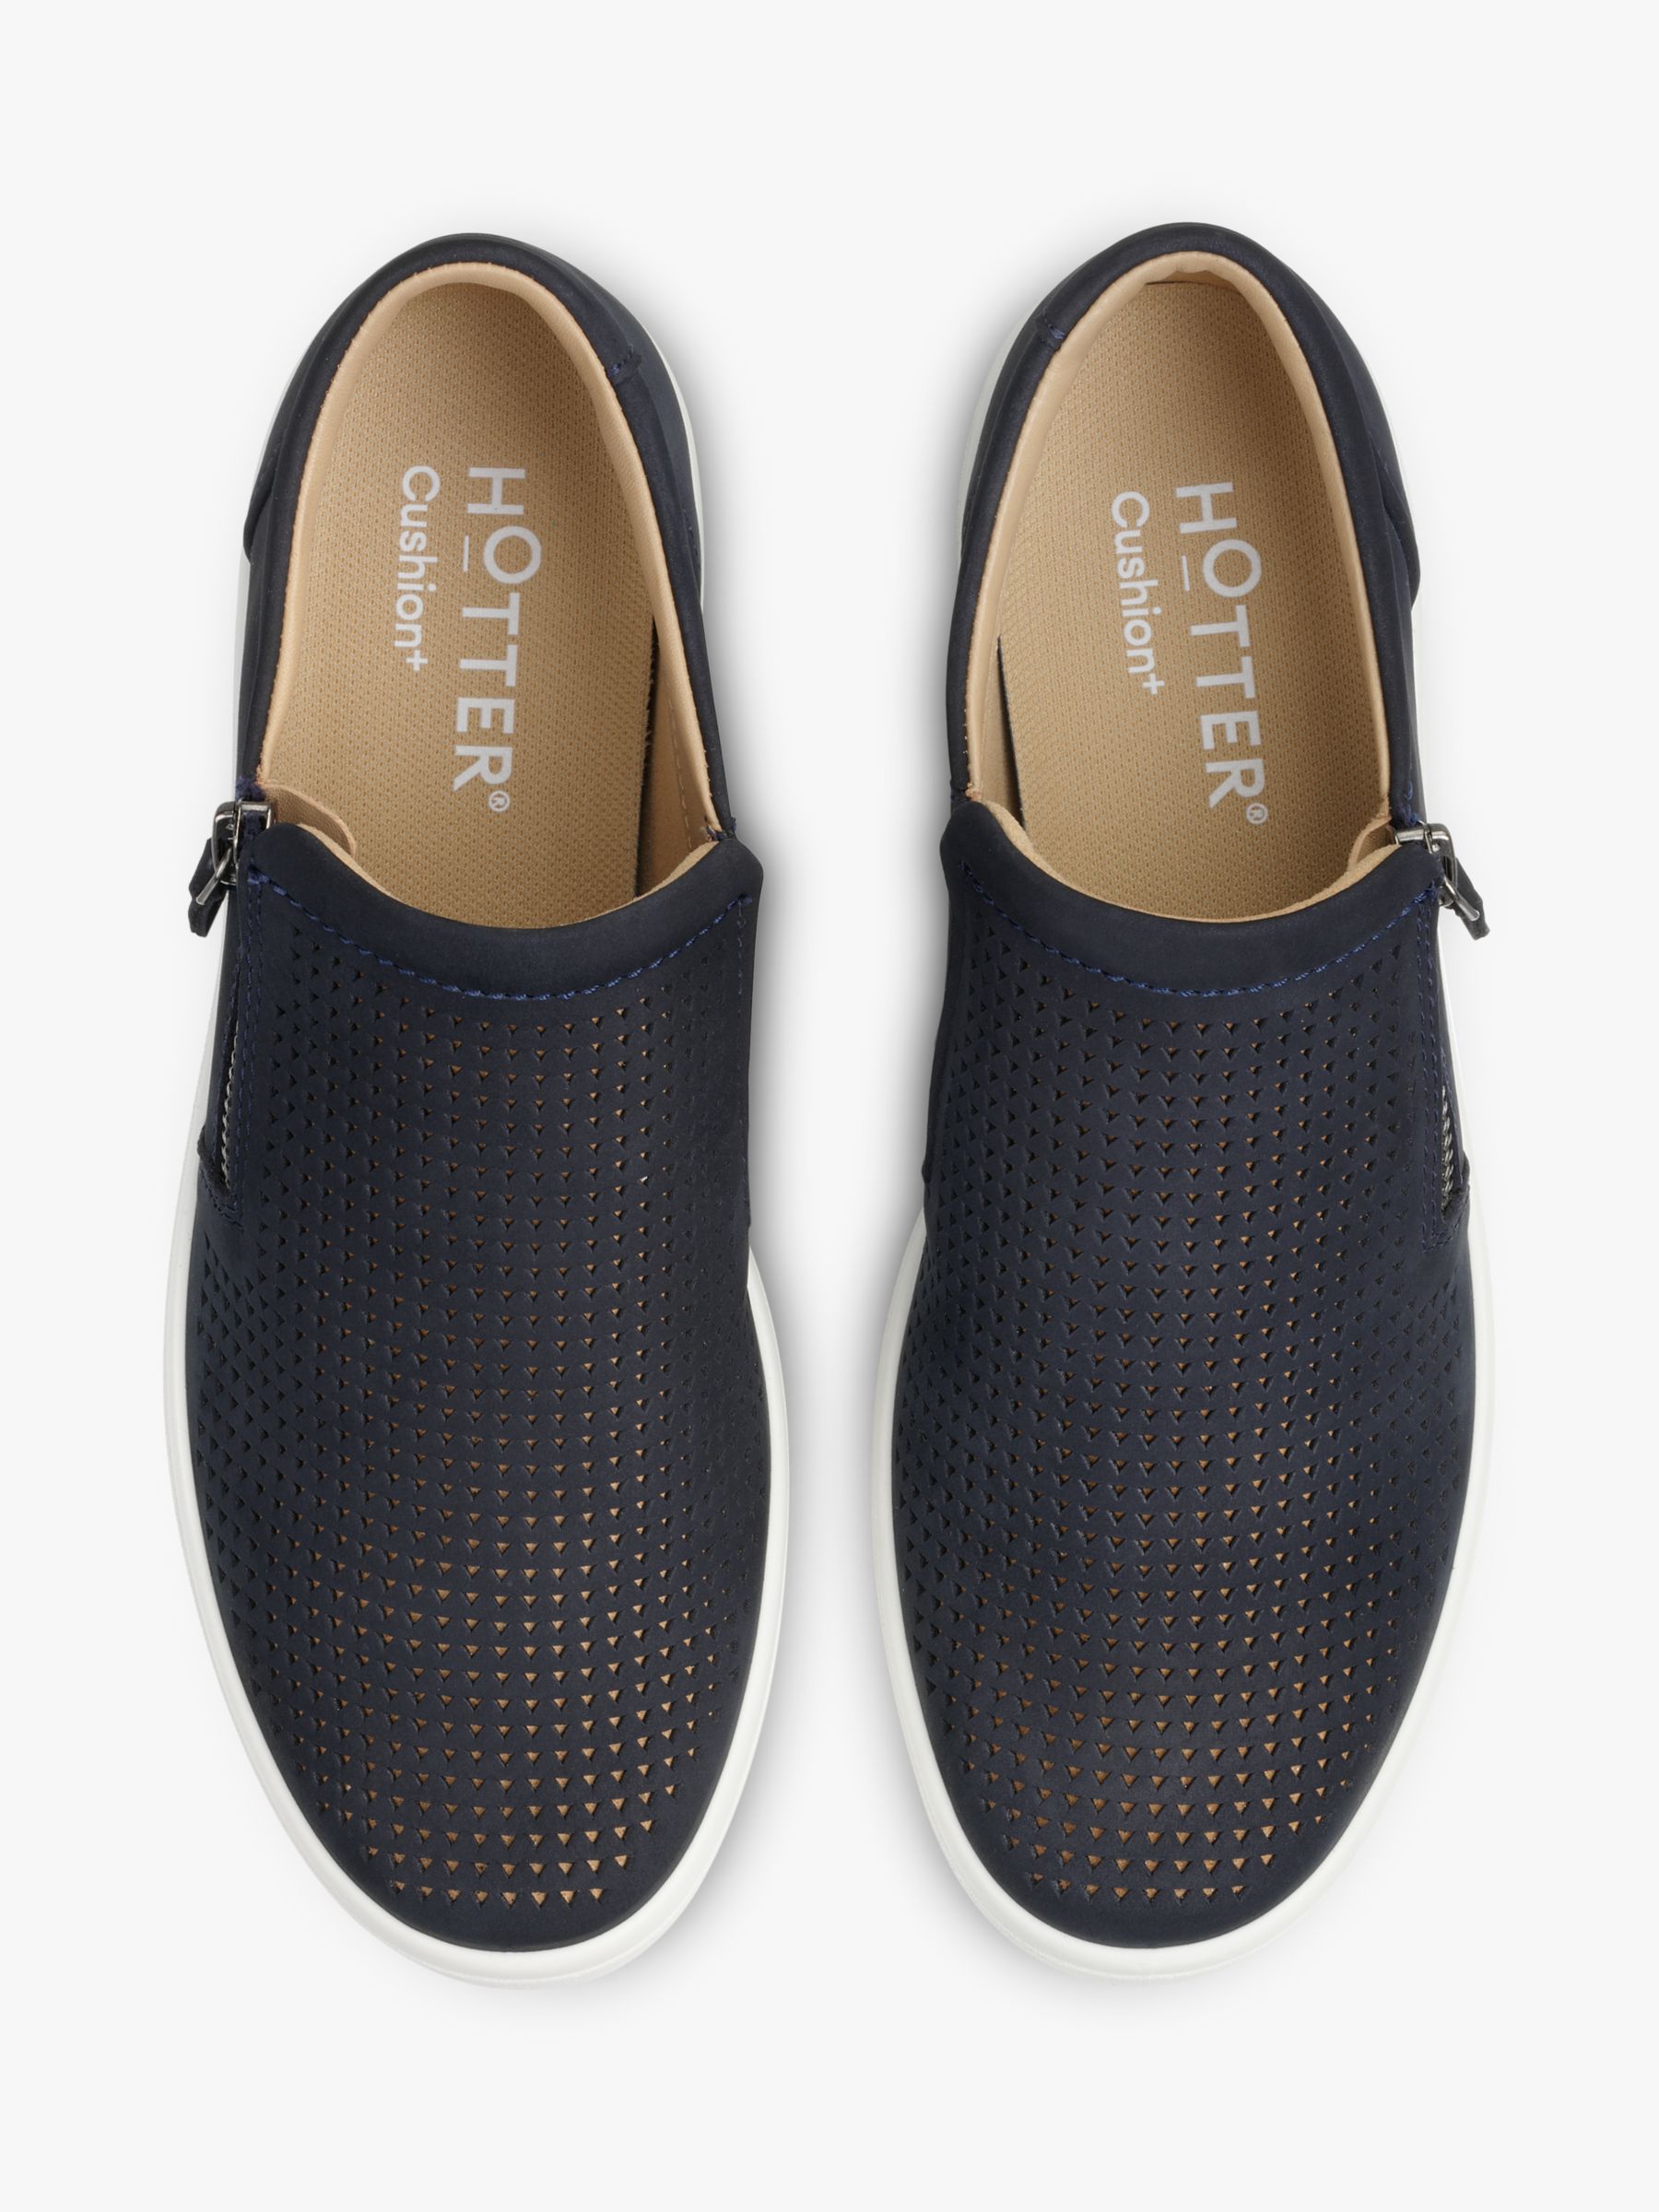 Buy Hotter Daisy Wide Fit Summer Deck Shoes Online at johnlewis.com